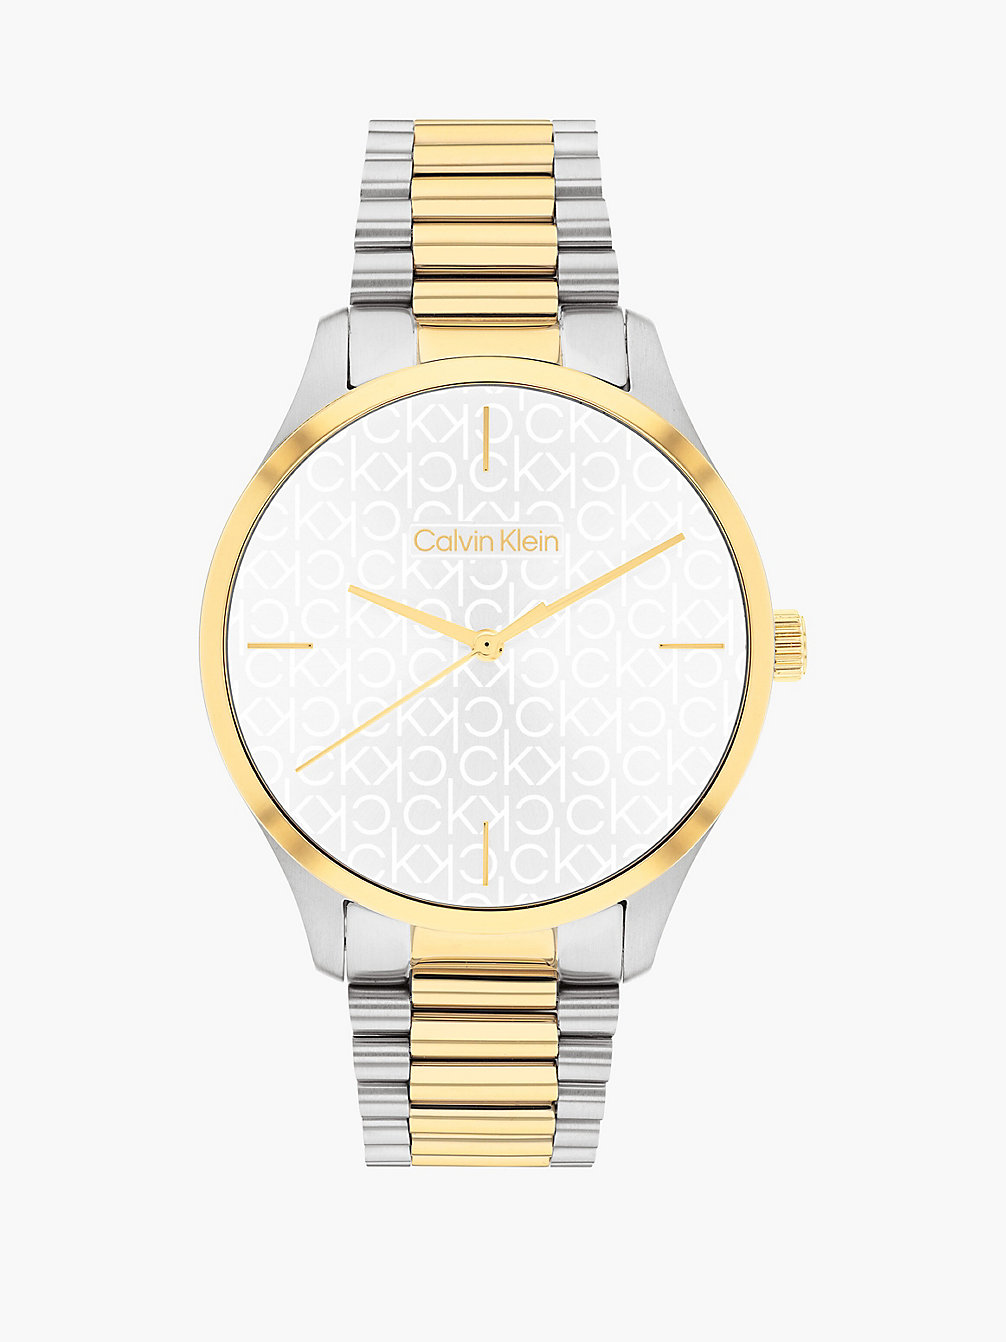 TWO TONE Watch - Iconic undefined unisex Calvin Klein